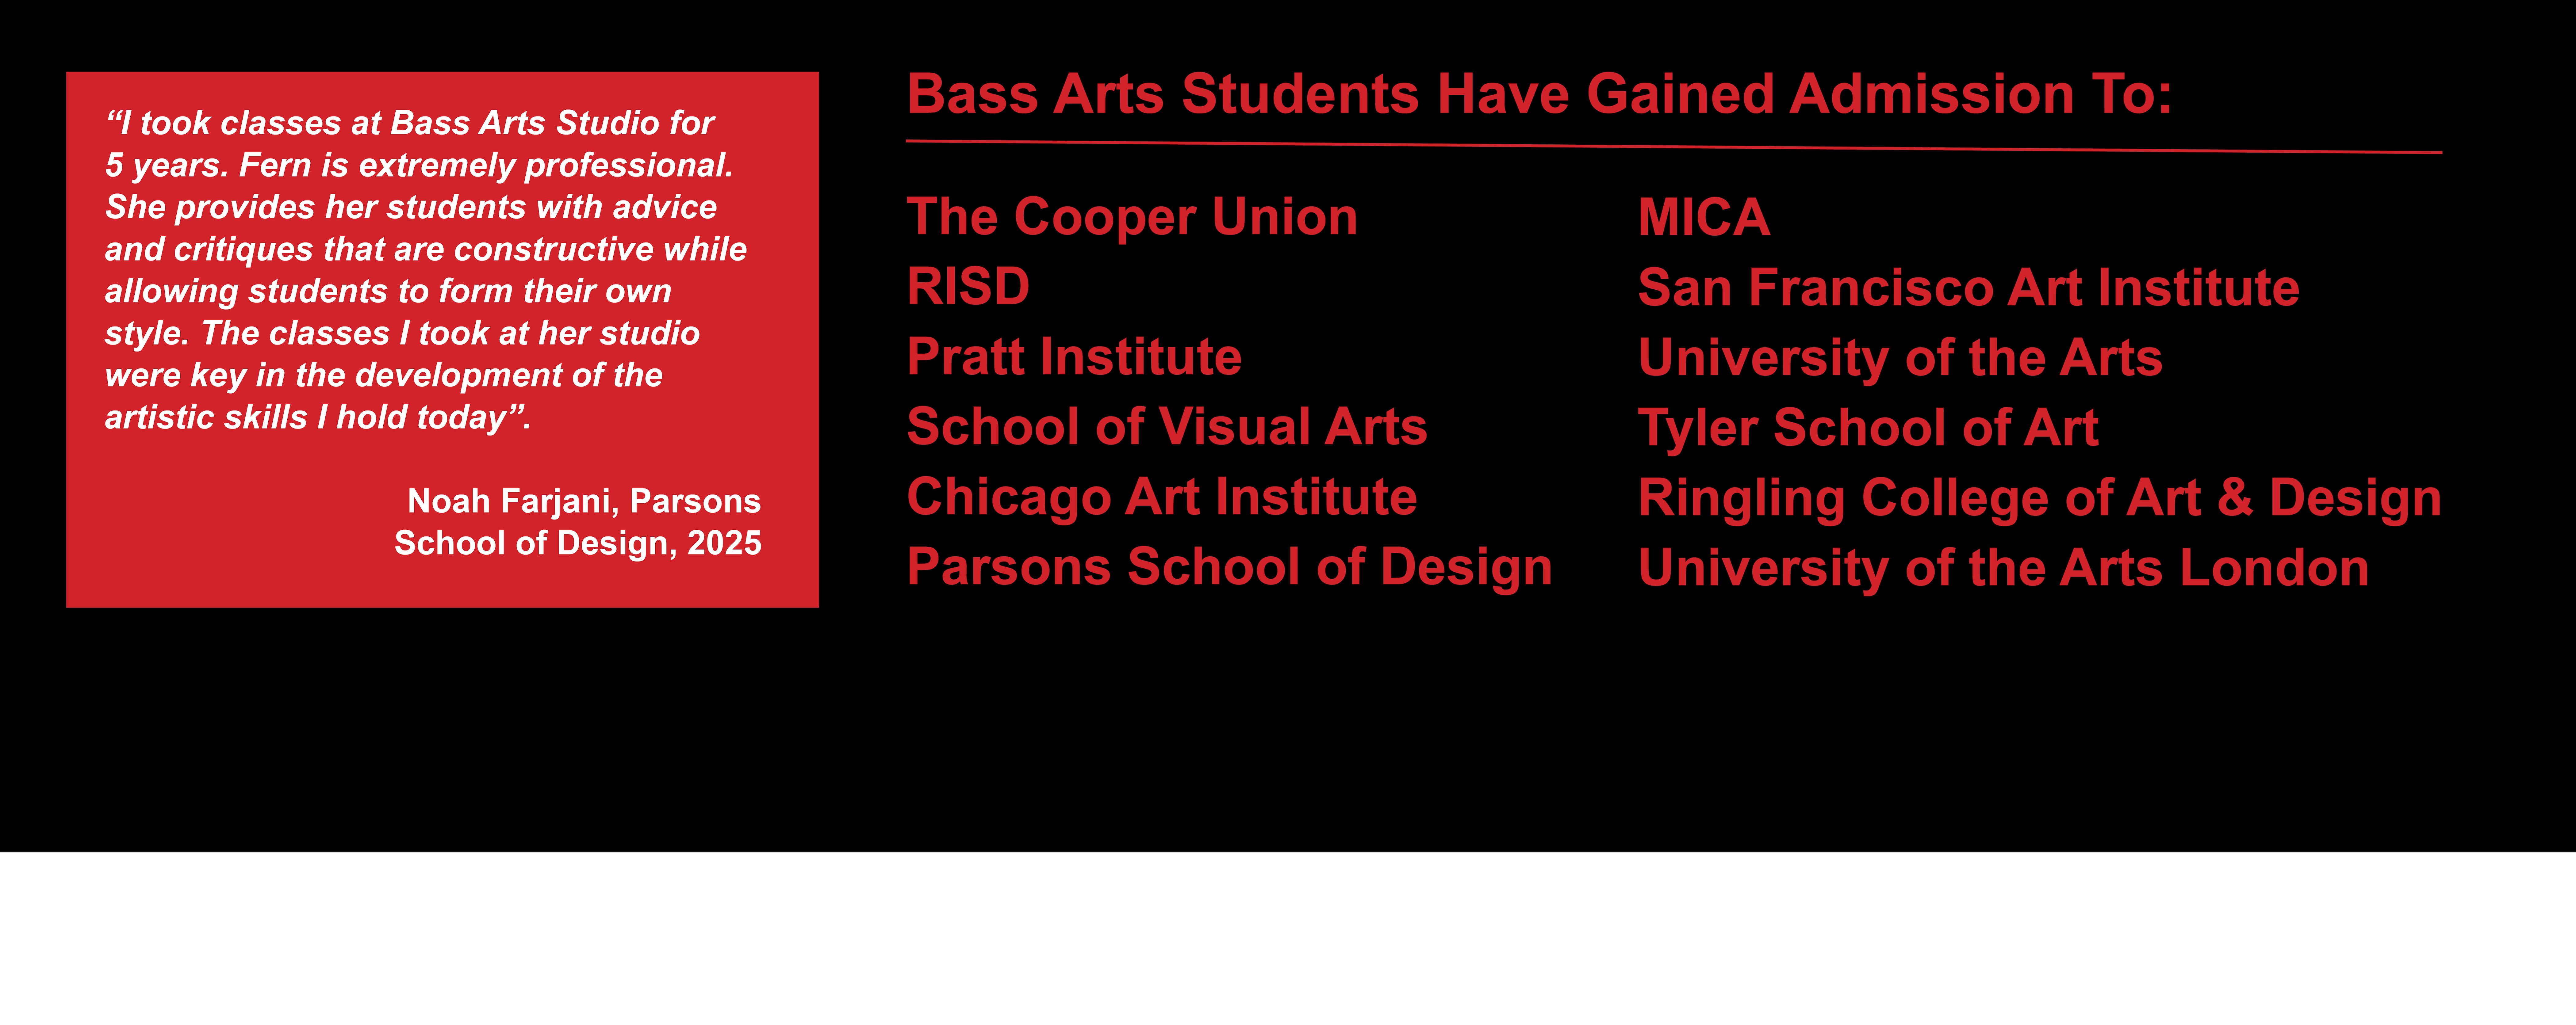 Thumbnail for the post titled: Bass Arts Studio Develops Young Artists